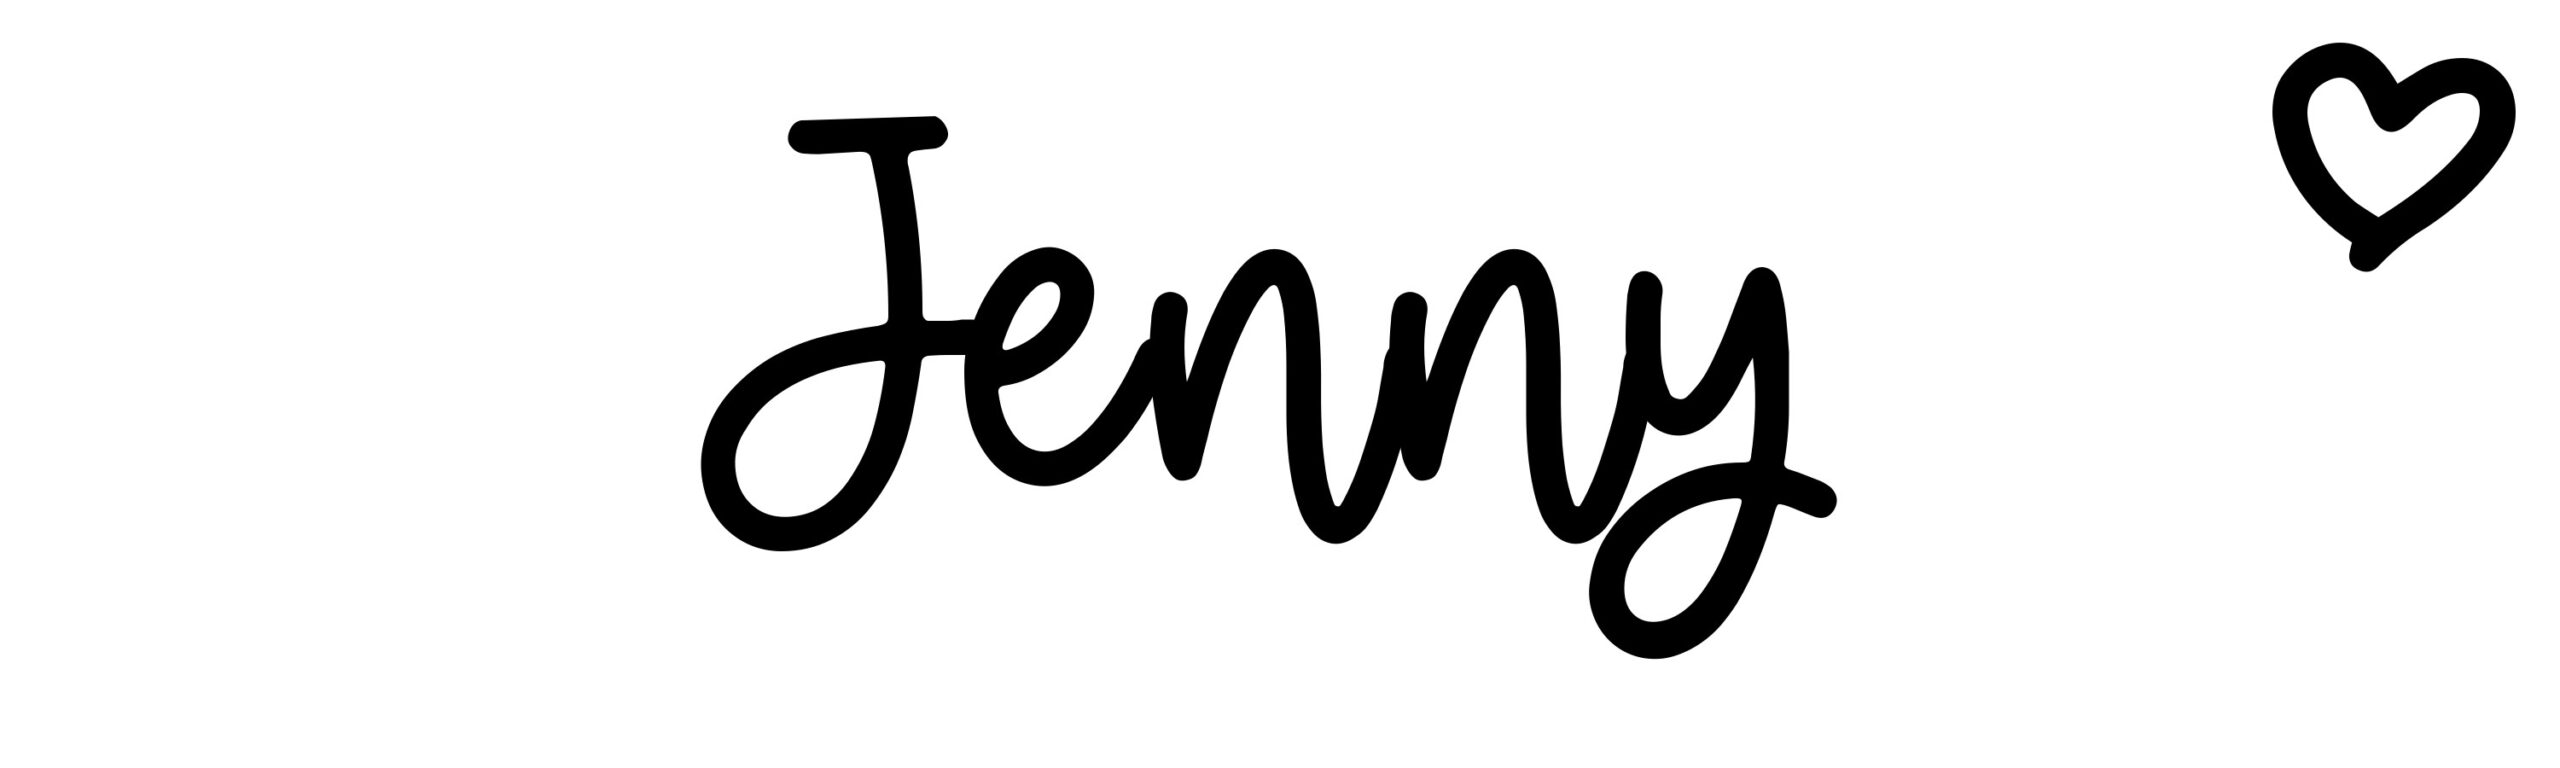 Jenny - Name meaning, origin, variations and more